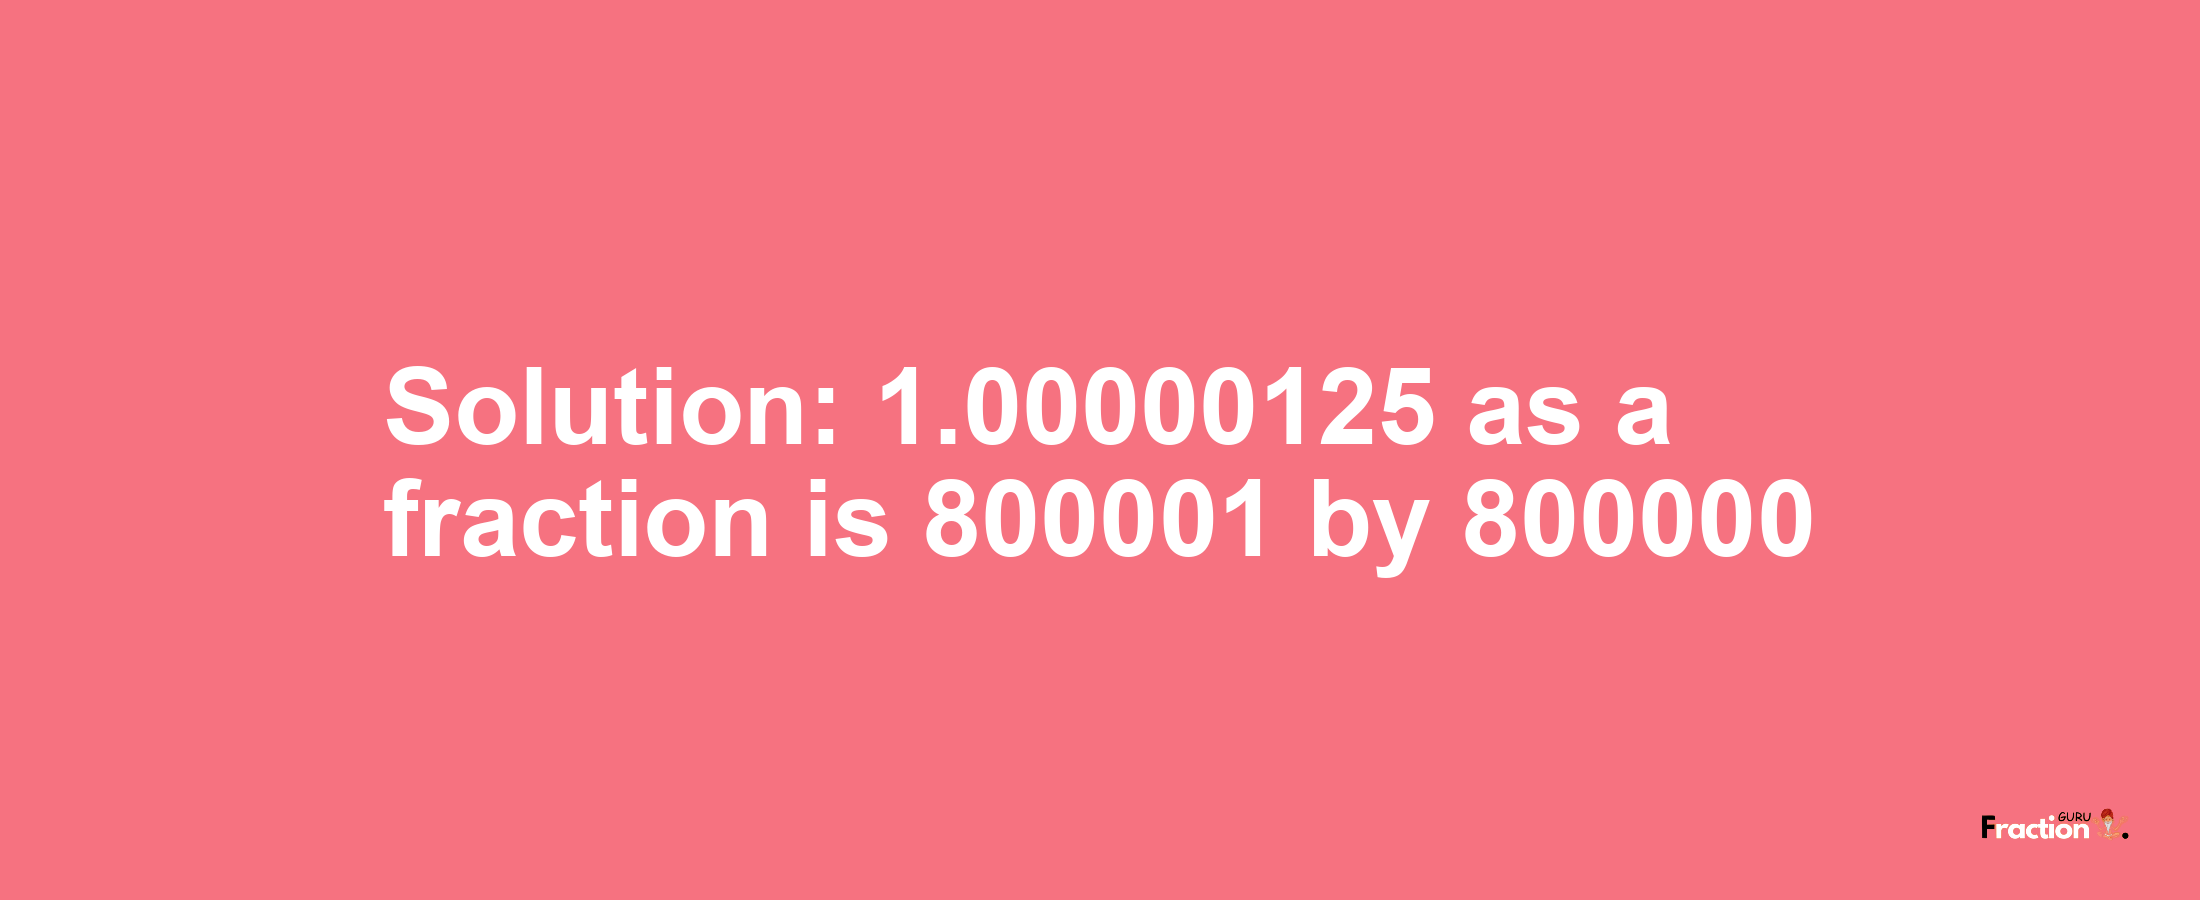 Solution:1.00000125 as a fraction is 800001/800000